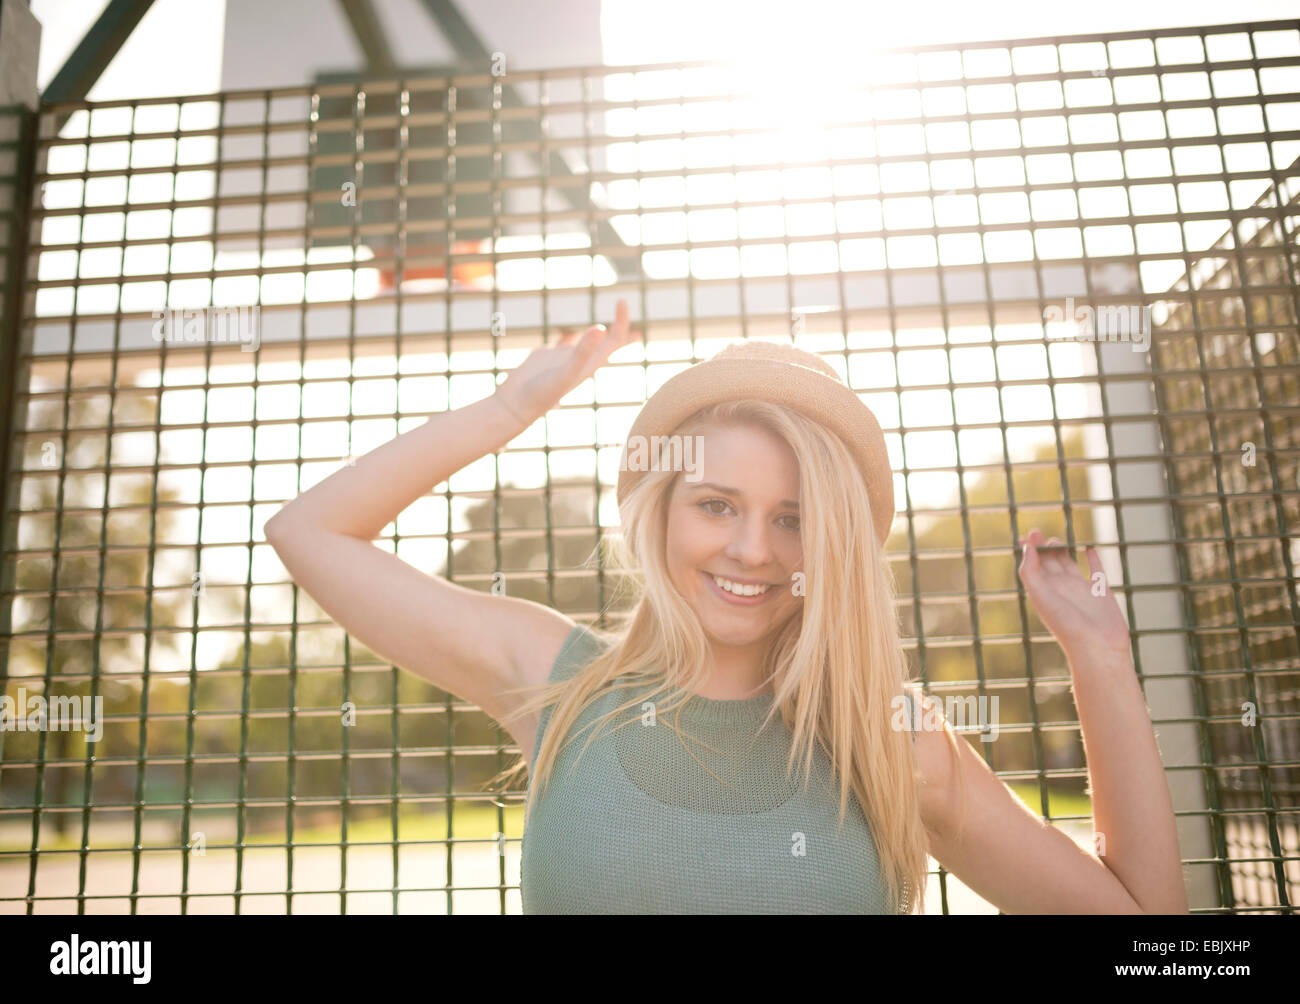 Portrait of young female basketball player holding onto wire fence Stock Photo